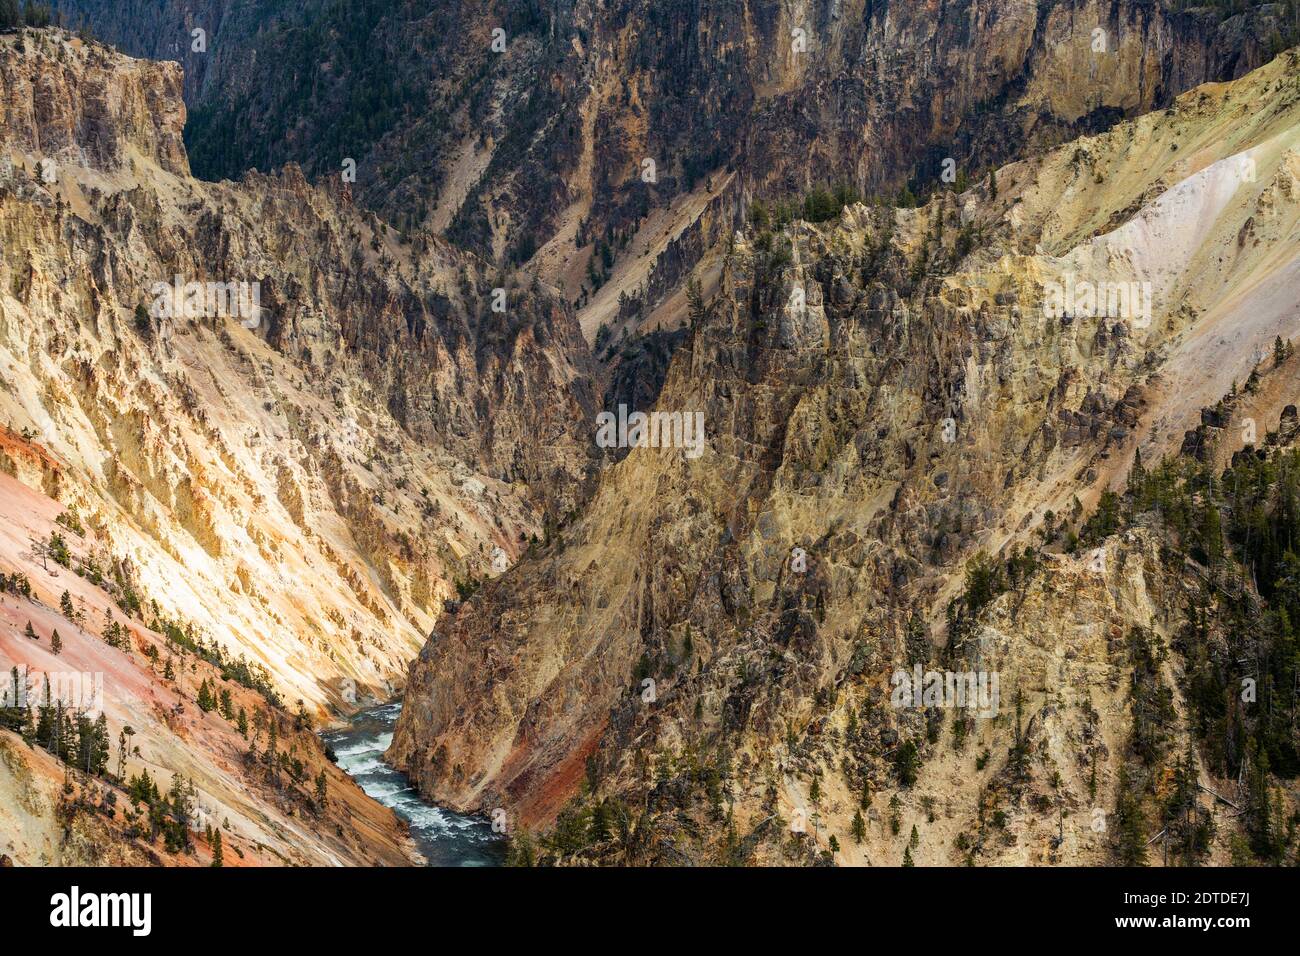 USA, Wyoming, Yellowstone National Park, Yellowstone River flowing through Grand Canyon in Yellowstone National Park Stock Photo